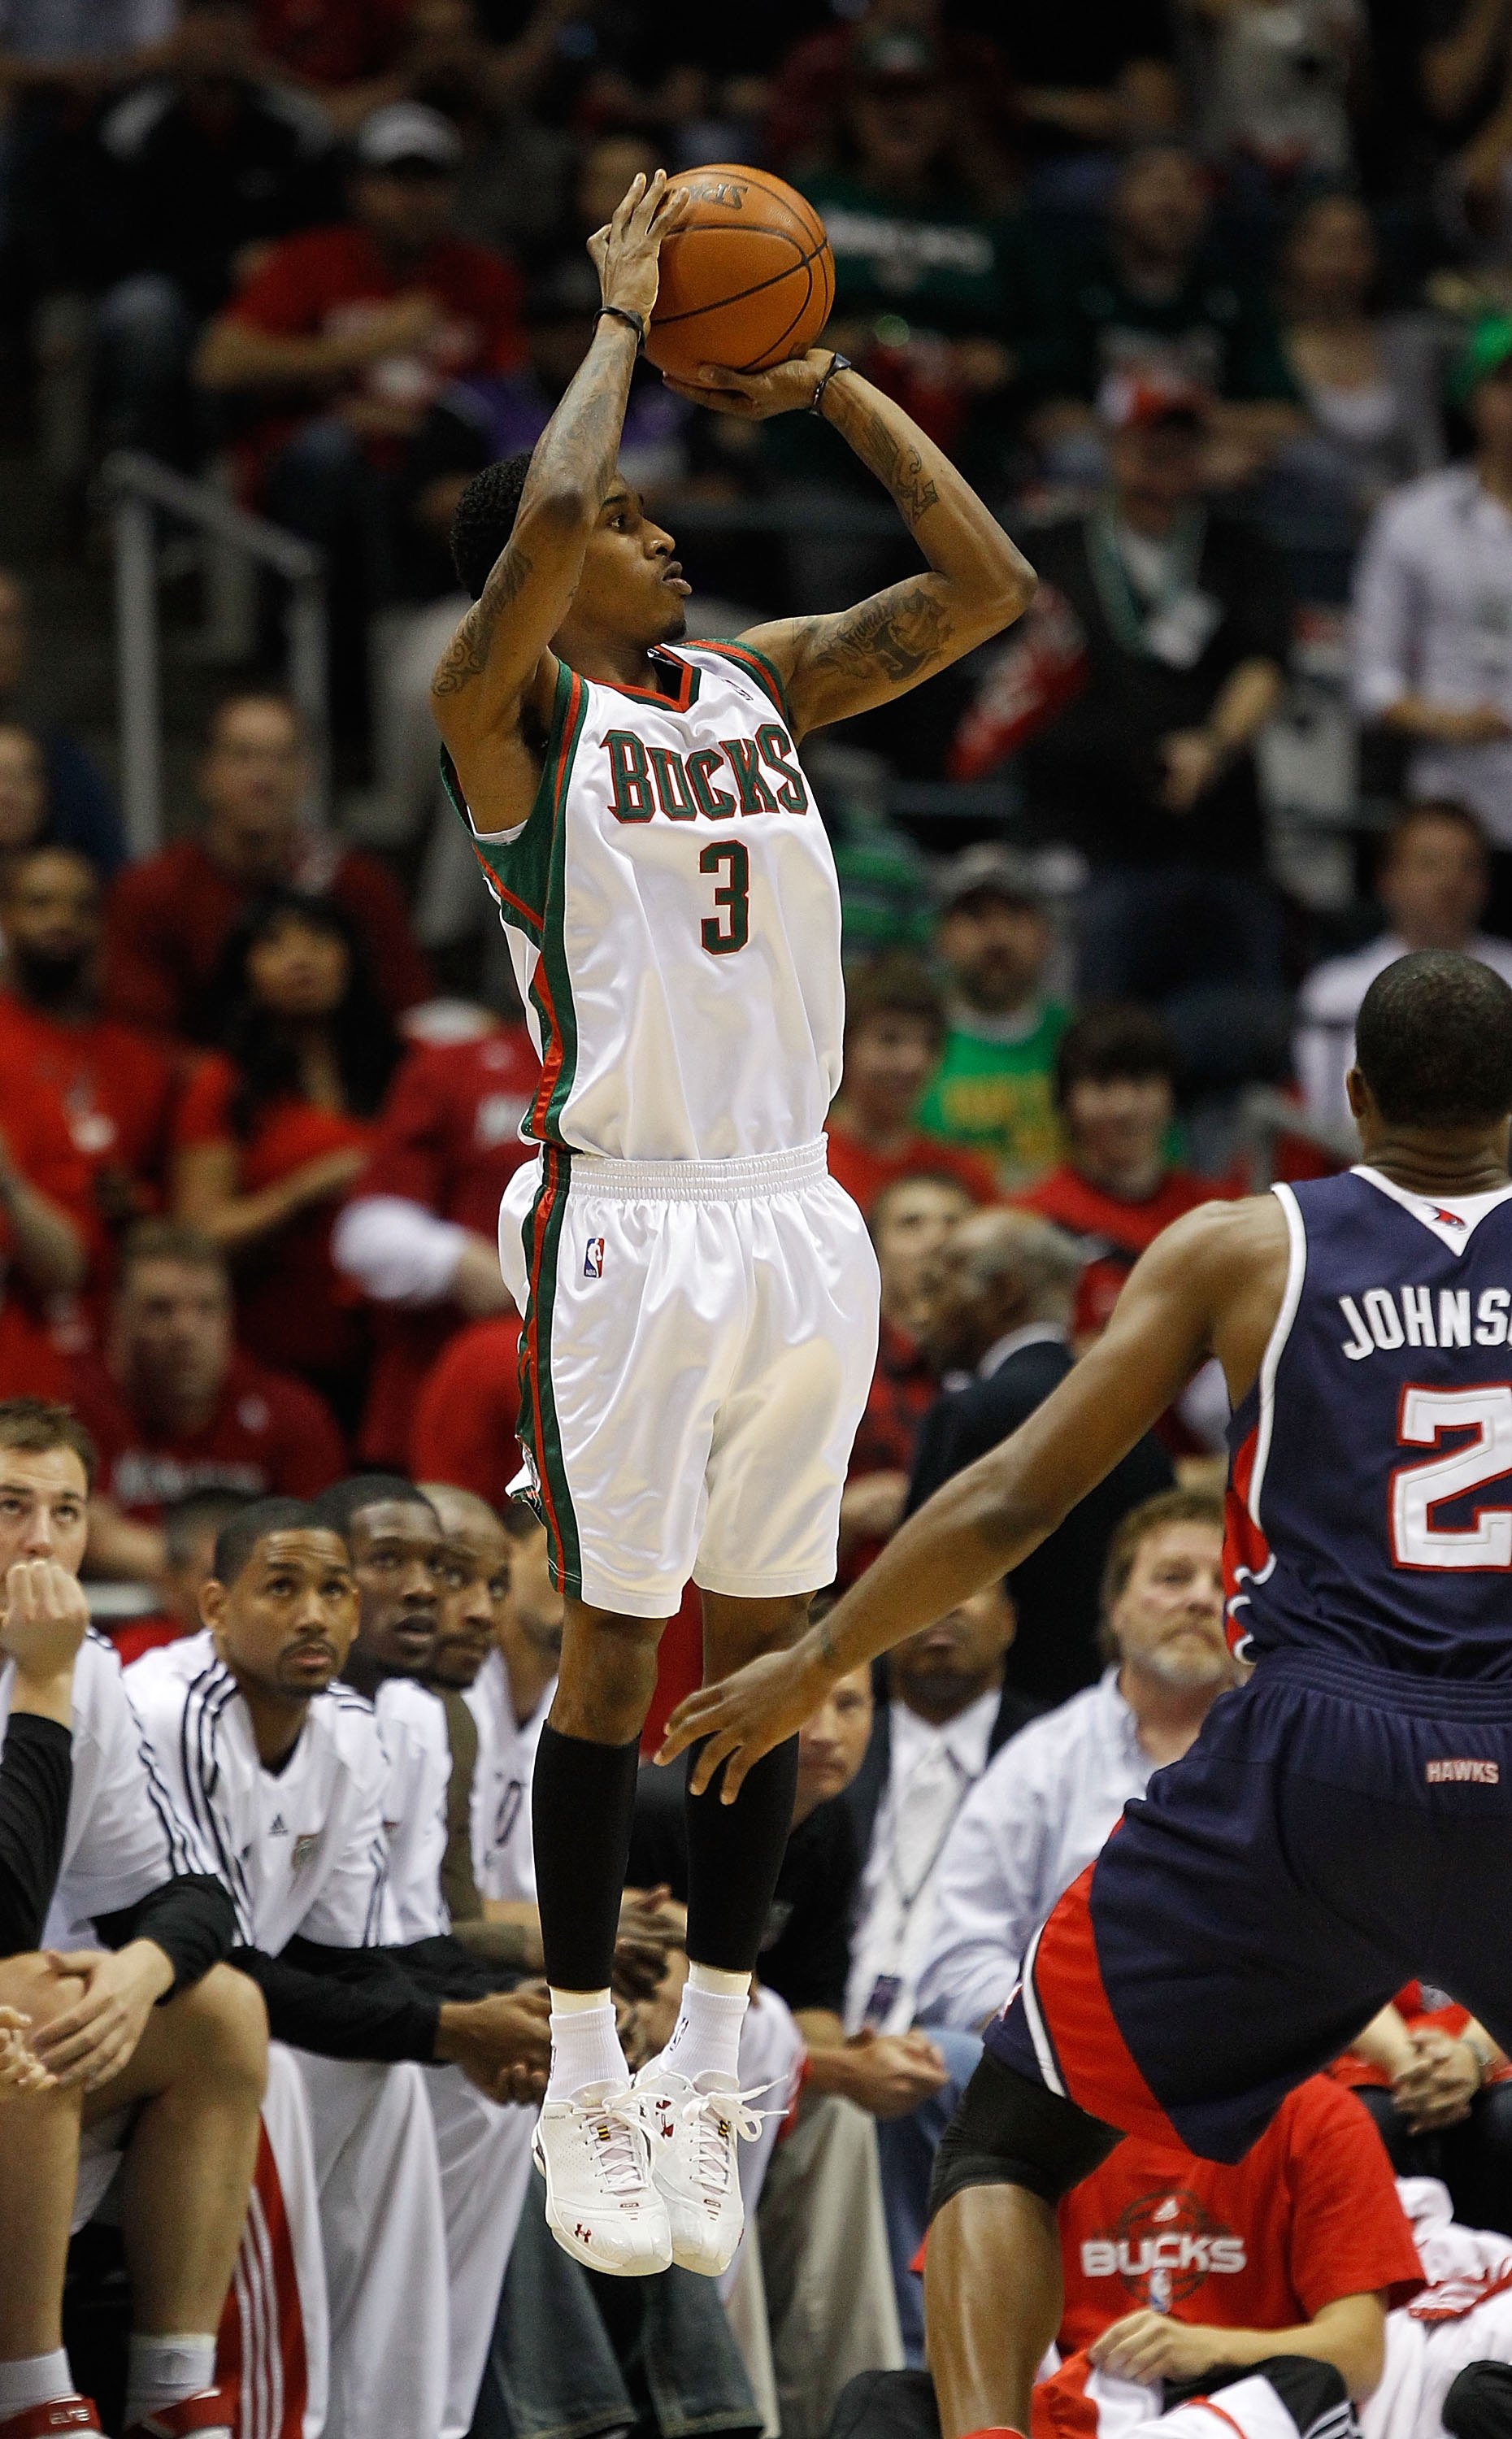 MILWAUKEE - APRIL 30: Brandon Jennings #3 of the Milwaukee Bucks puts up a shot against the Atlanta Hawks in Game Six of the Eastern Conference Quarterfinals during the 2010 NBA Playoffs at the Bradley Center on April 30, 2010 in Milwaukee, Wisconsin. The